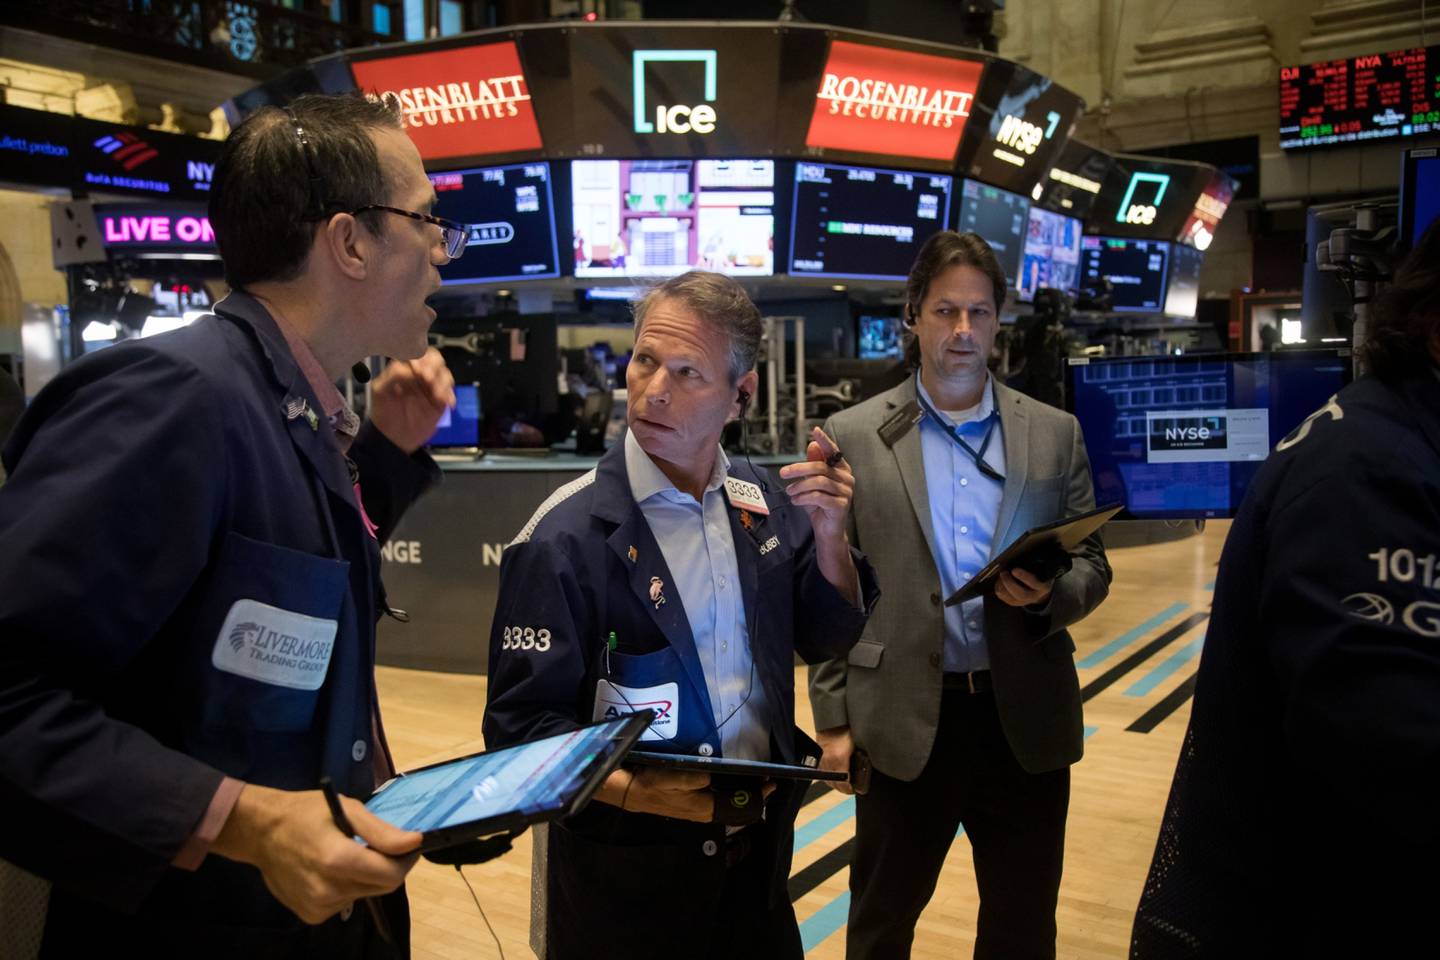 Traders work on the floor of the New York Stock Exchange (NYSE) in New York, US. Photographer: Michael Nagle/Bloomberg